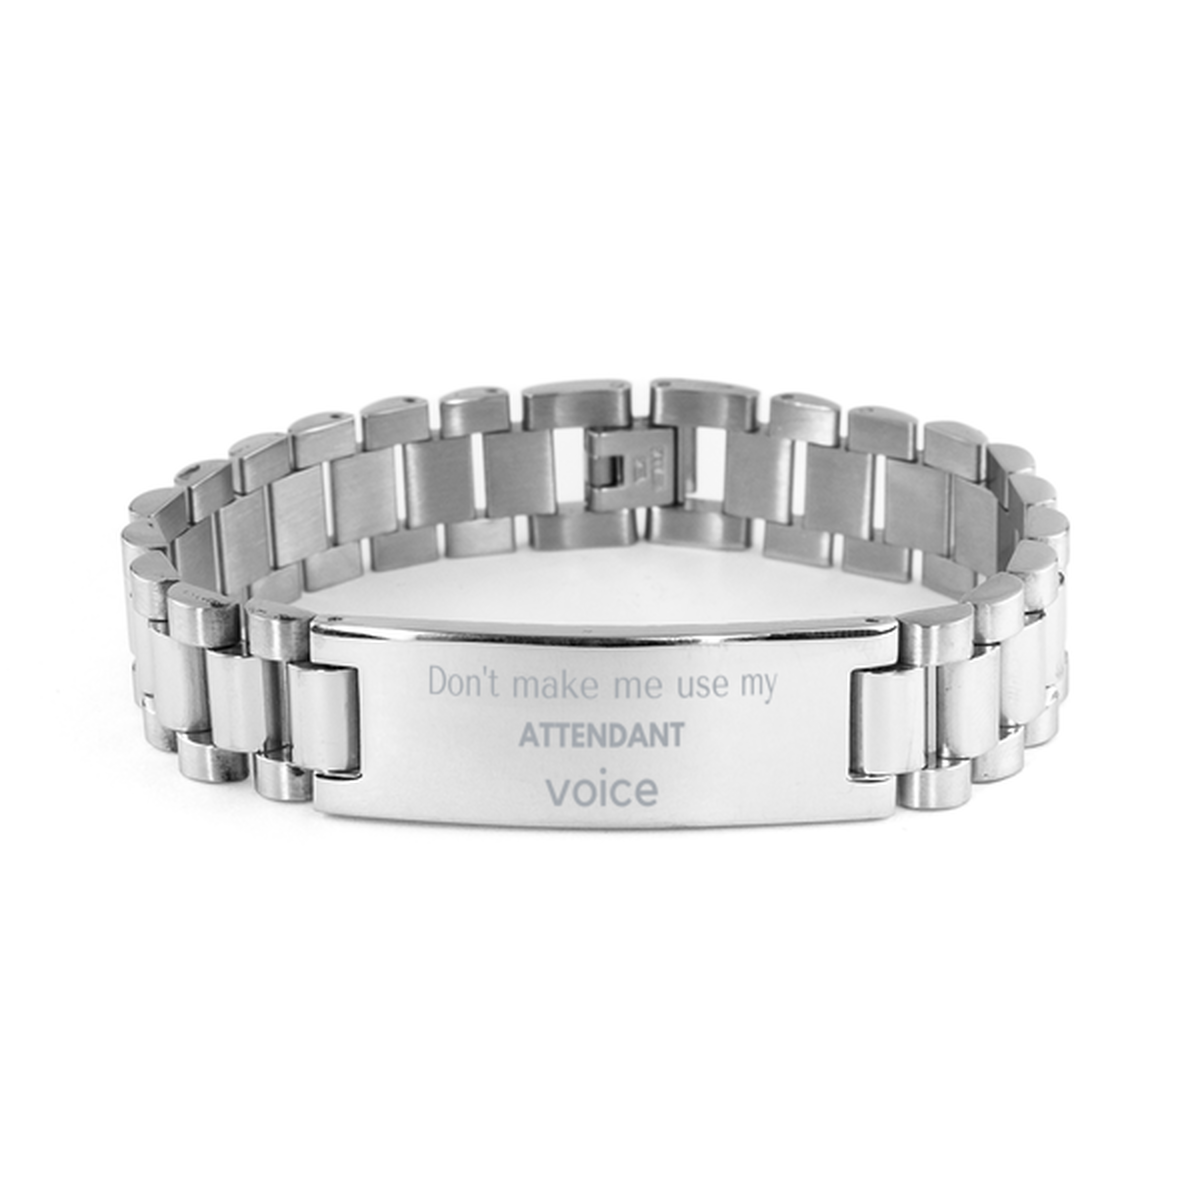 Don't make me use my Attendant voice, Sarcasm Attendant Gifts, Christmas Attendant Ladder Stainless Steel Bracelet Birthday Unique Gifts For Attendant Coworkers, Men, Women, Colleague, Friends